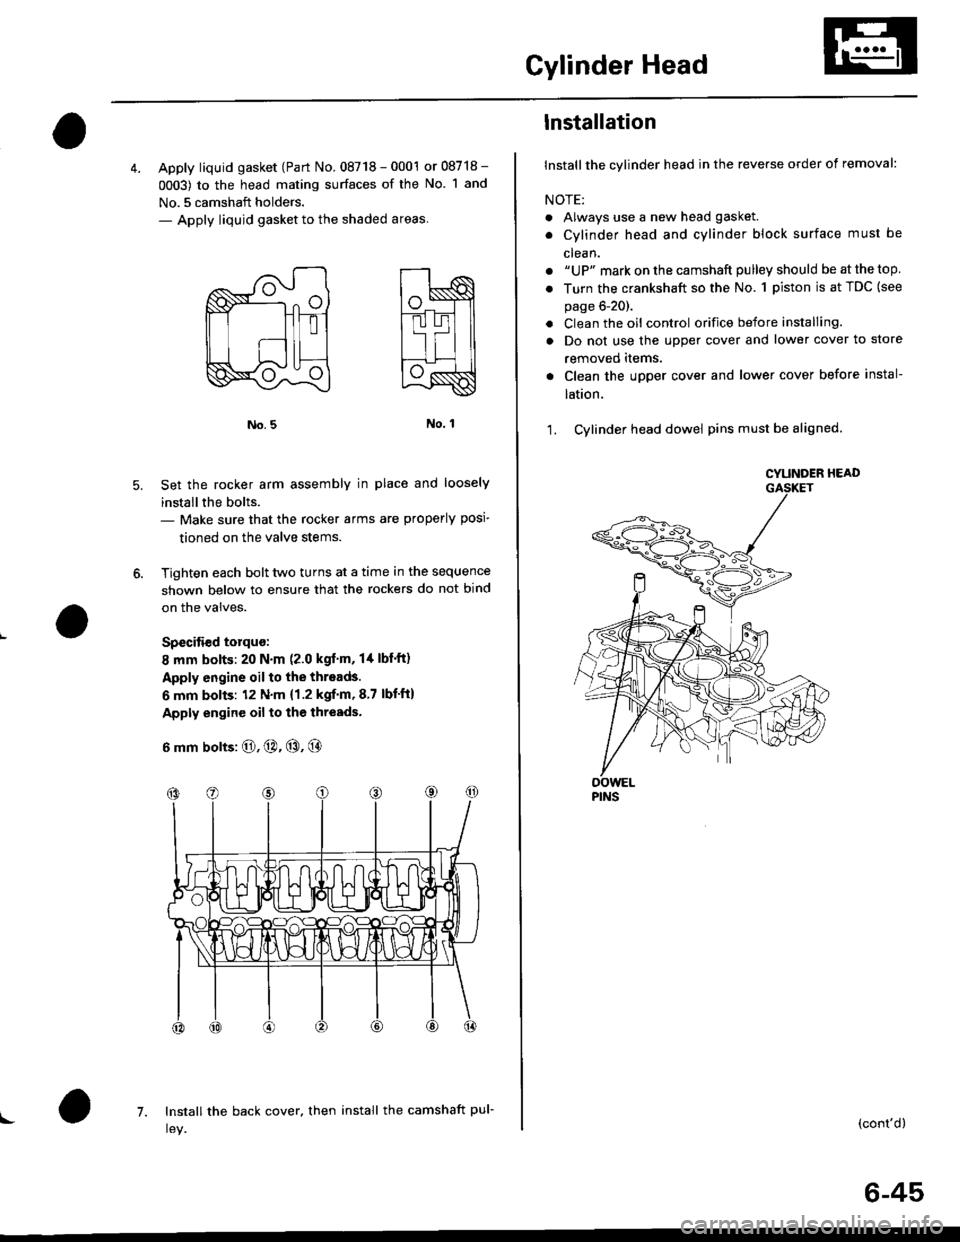 HONDA CIVIC 1996 6.G Owners Manual Cylinder Head
4. Apply liquid gasket (Part No. 08718 - 0001 or 08718 -
0003) to the head mating surfaces of the No. 1 and
No.5 camshaft holders.- Apply liquid gasket to the shaded areas
Set the rocker